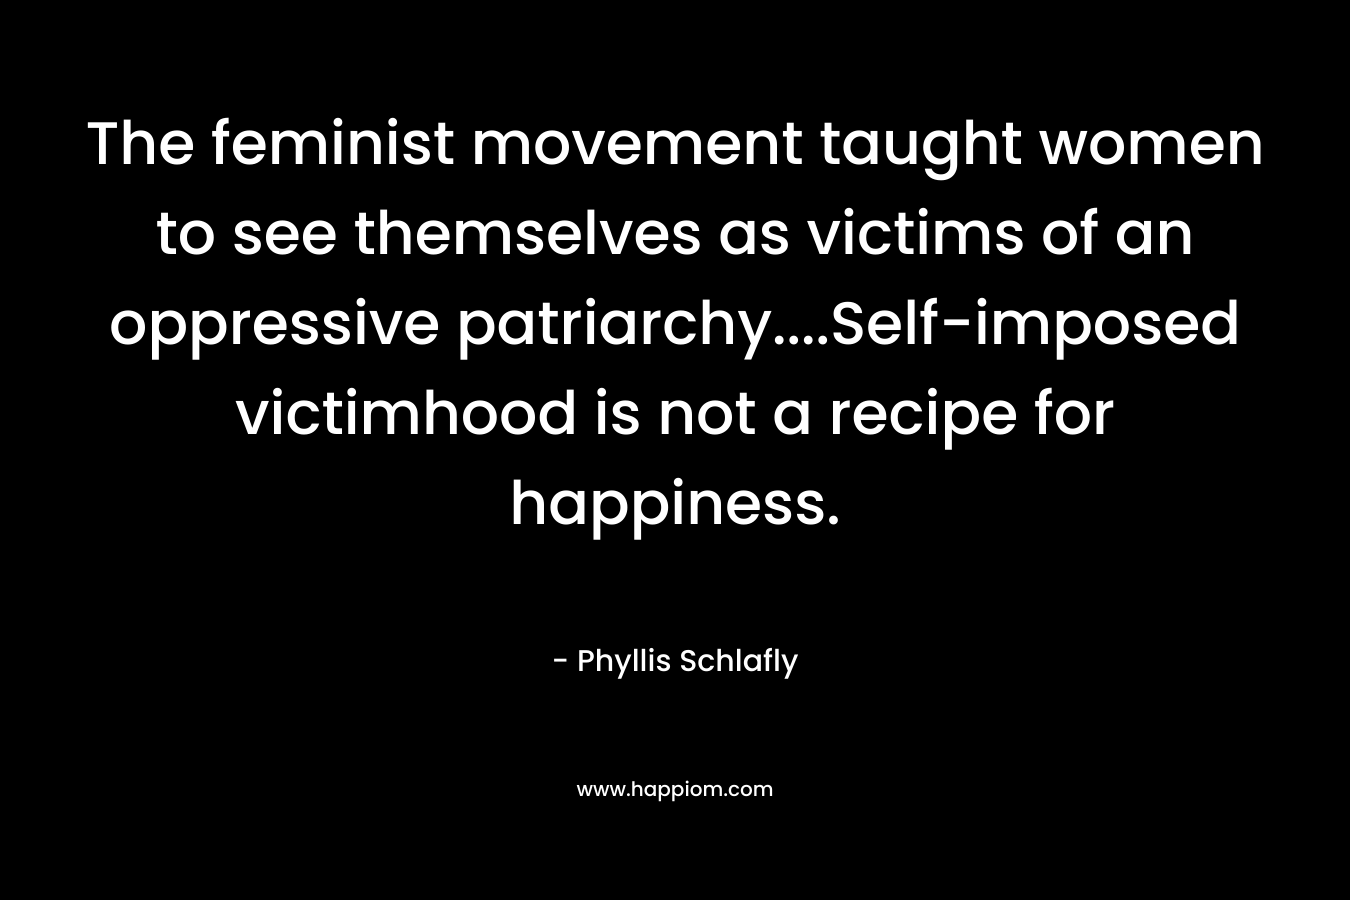 The feminist movement taught women to see themselves as victims of an oppressive patriarchy....Self-imposed victimhood is not a recipe for happiness.